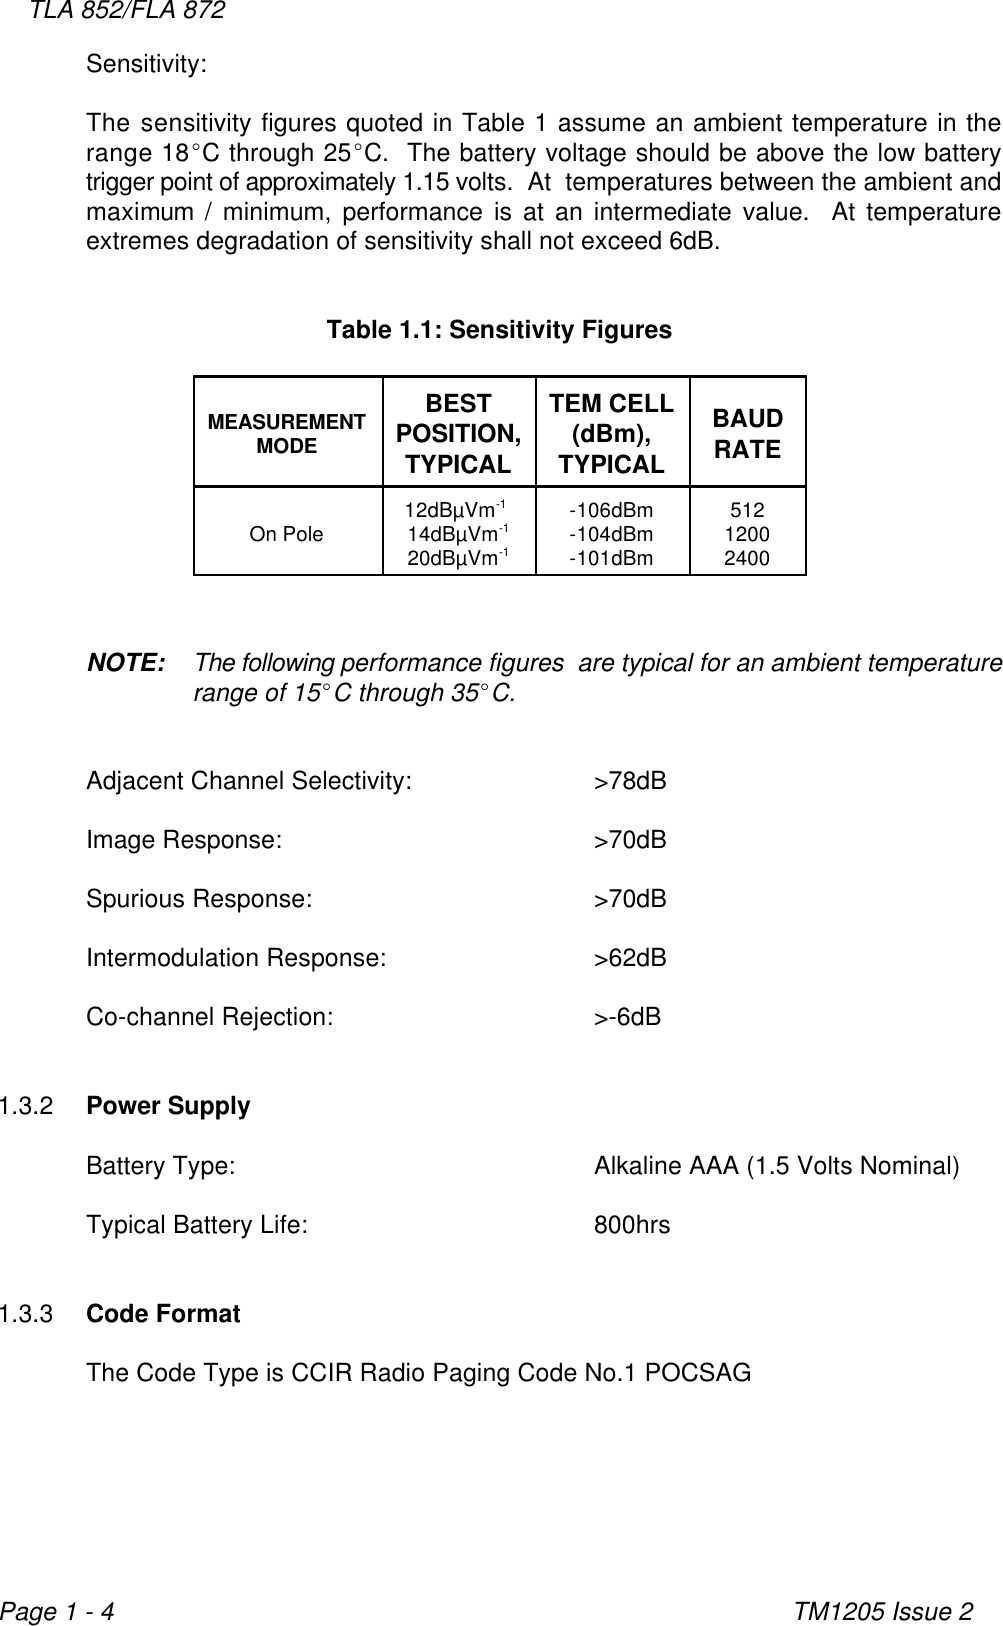 TLA 852/FLA 872TM1205 Issue 2Page 1 - 4Sensitivity:The sensitivity figures quoted in Table 1 assume an ambient temperature in therange 18EC through 25EC.  The battery voltage should be above the low batterytrigger point of approximately 1.15 volts.  At  temperatures between the ambient andmaximum / minimum, performance is at an intermediate value.  At temperatureextremes degradation of sensitivity shall not exceed 6dB.Table 1.1: Sensitivity FiguresMEASUREMENTMODEBEST TEM CELLPOSITION, (dBm),TYPICAL TYPICALBAUDRATEOn Pole 14dBµVm -104dBm 120012dBµVm  -106dBm 512-1-120dBµVm -101dBm 2400-1NOTE: The following performance figures  are typical for an ambient temperaturerange of 15EC through 35EC.Adjacent Channel Selectivity: &gt;78dBImage Response: &gt;70dBSpurious Response: &gt;70dBIntermodulation Response: &gt;62dBCo-channel Rejection: &gt;-6dB1.3.2 Power SupplyBattery Type: Alkaline AAA (1.5 Volts Nominal)Typical Battery Life: 800hrs1.3.3 Code FormatThe Code Type is CCIR Radio Paging Code No.1 POCSAG